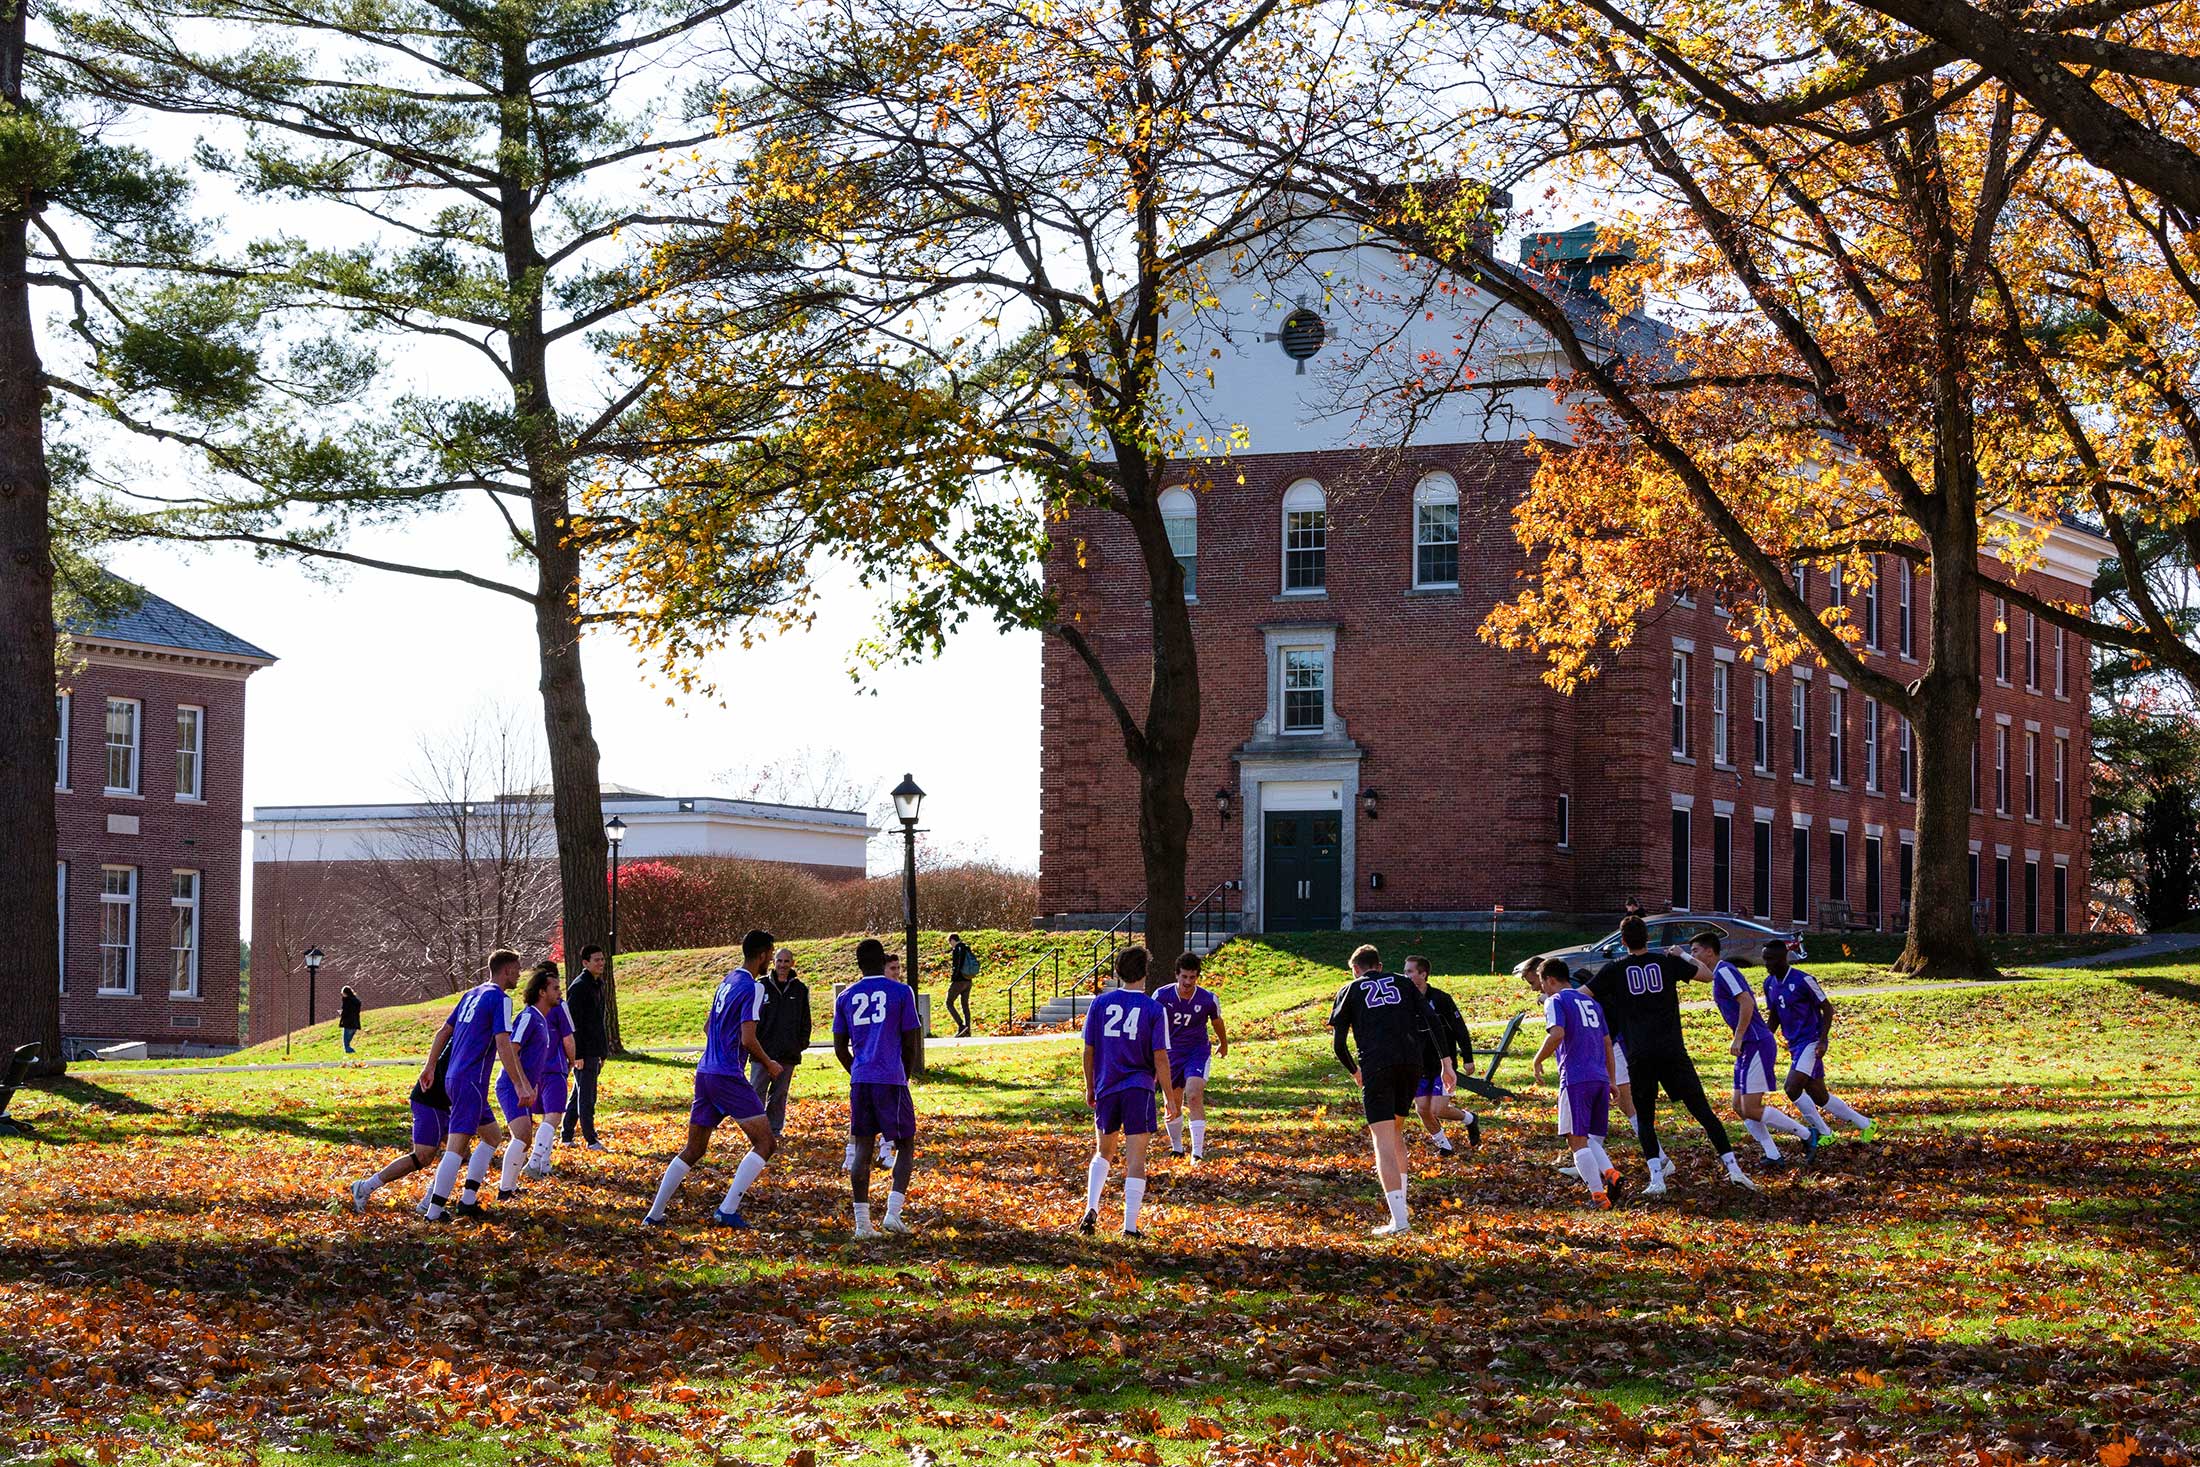 The men's soccer team practicing on the Quad